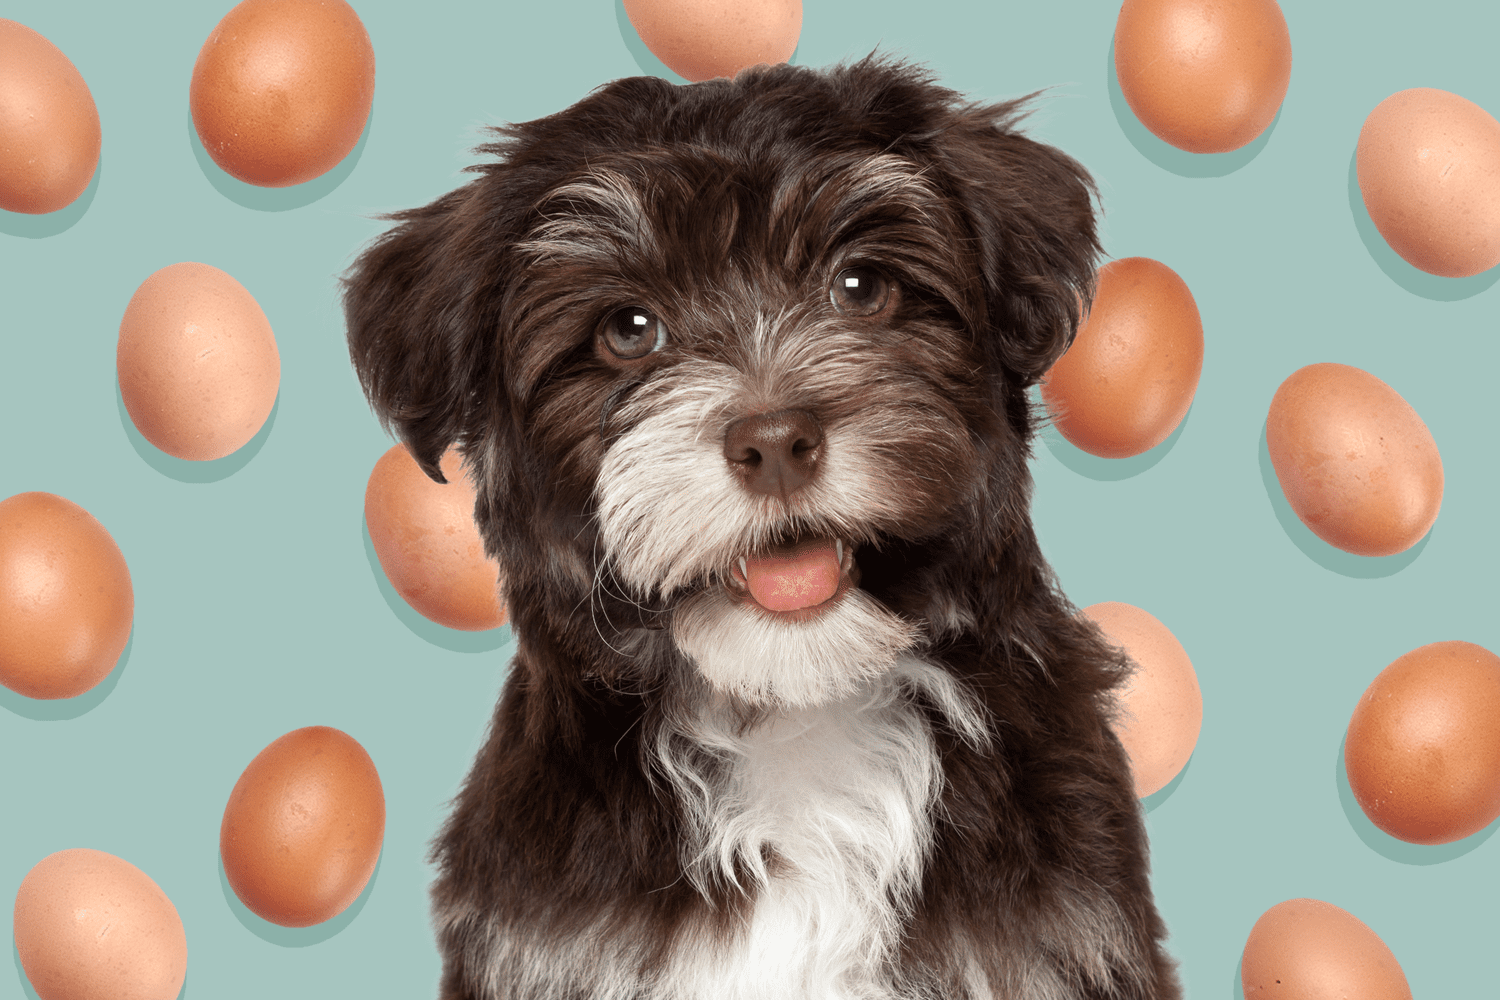 Can Dogs Eat Eggs? Sure, Just Stay Away From the Shells